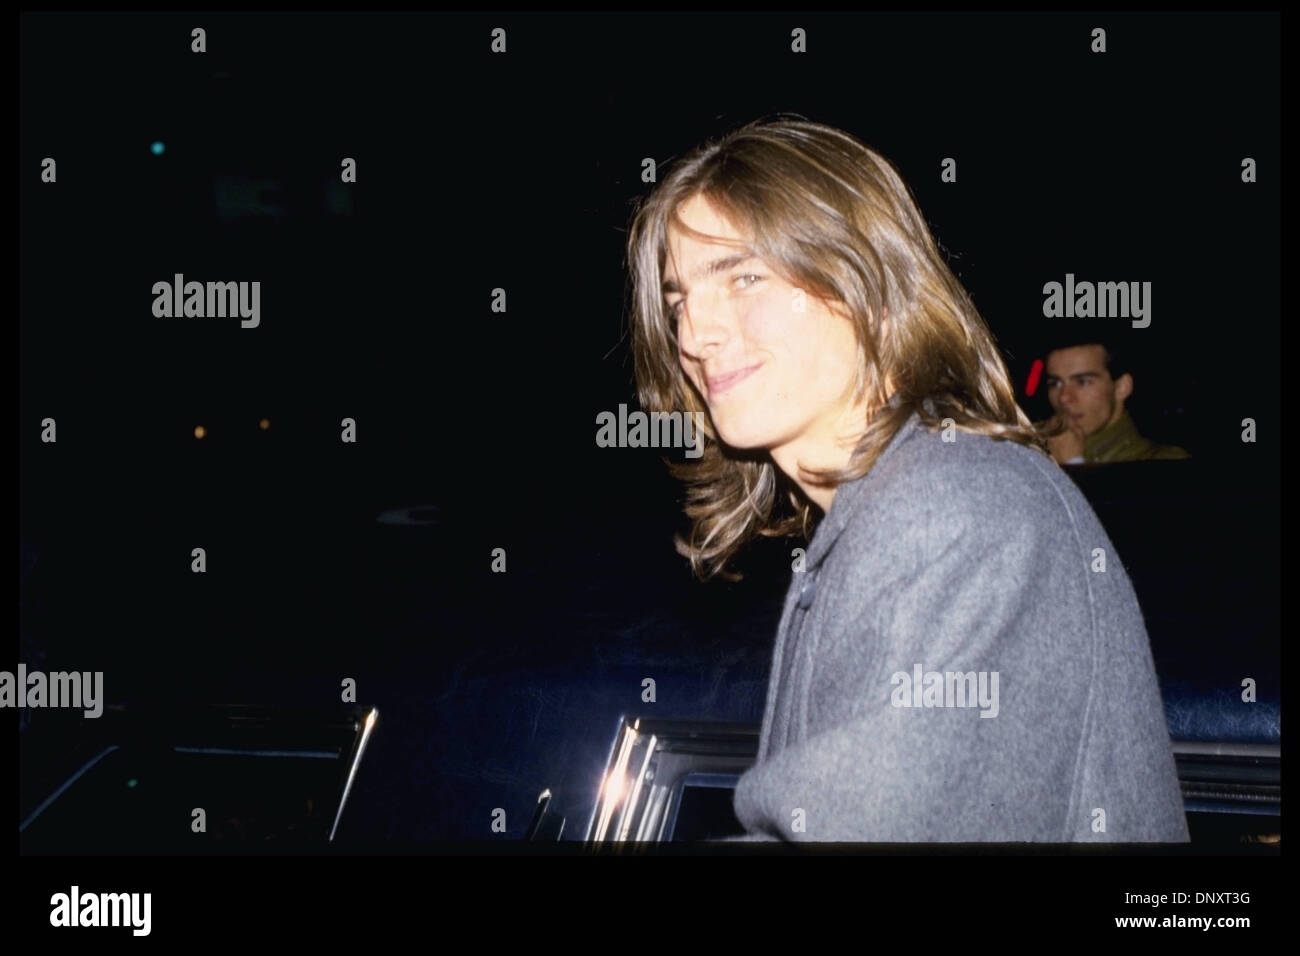 Hollywood, CA, USA; TOM CRUISE is shown with long hair in an undated ...